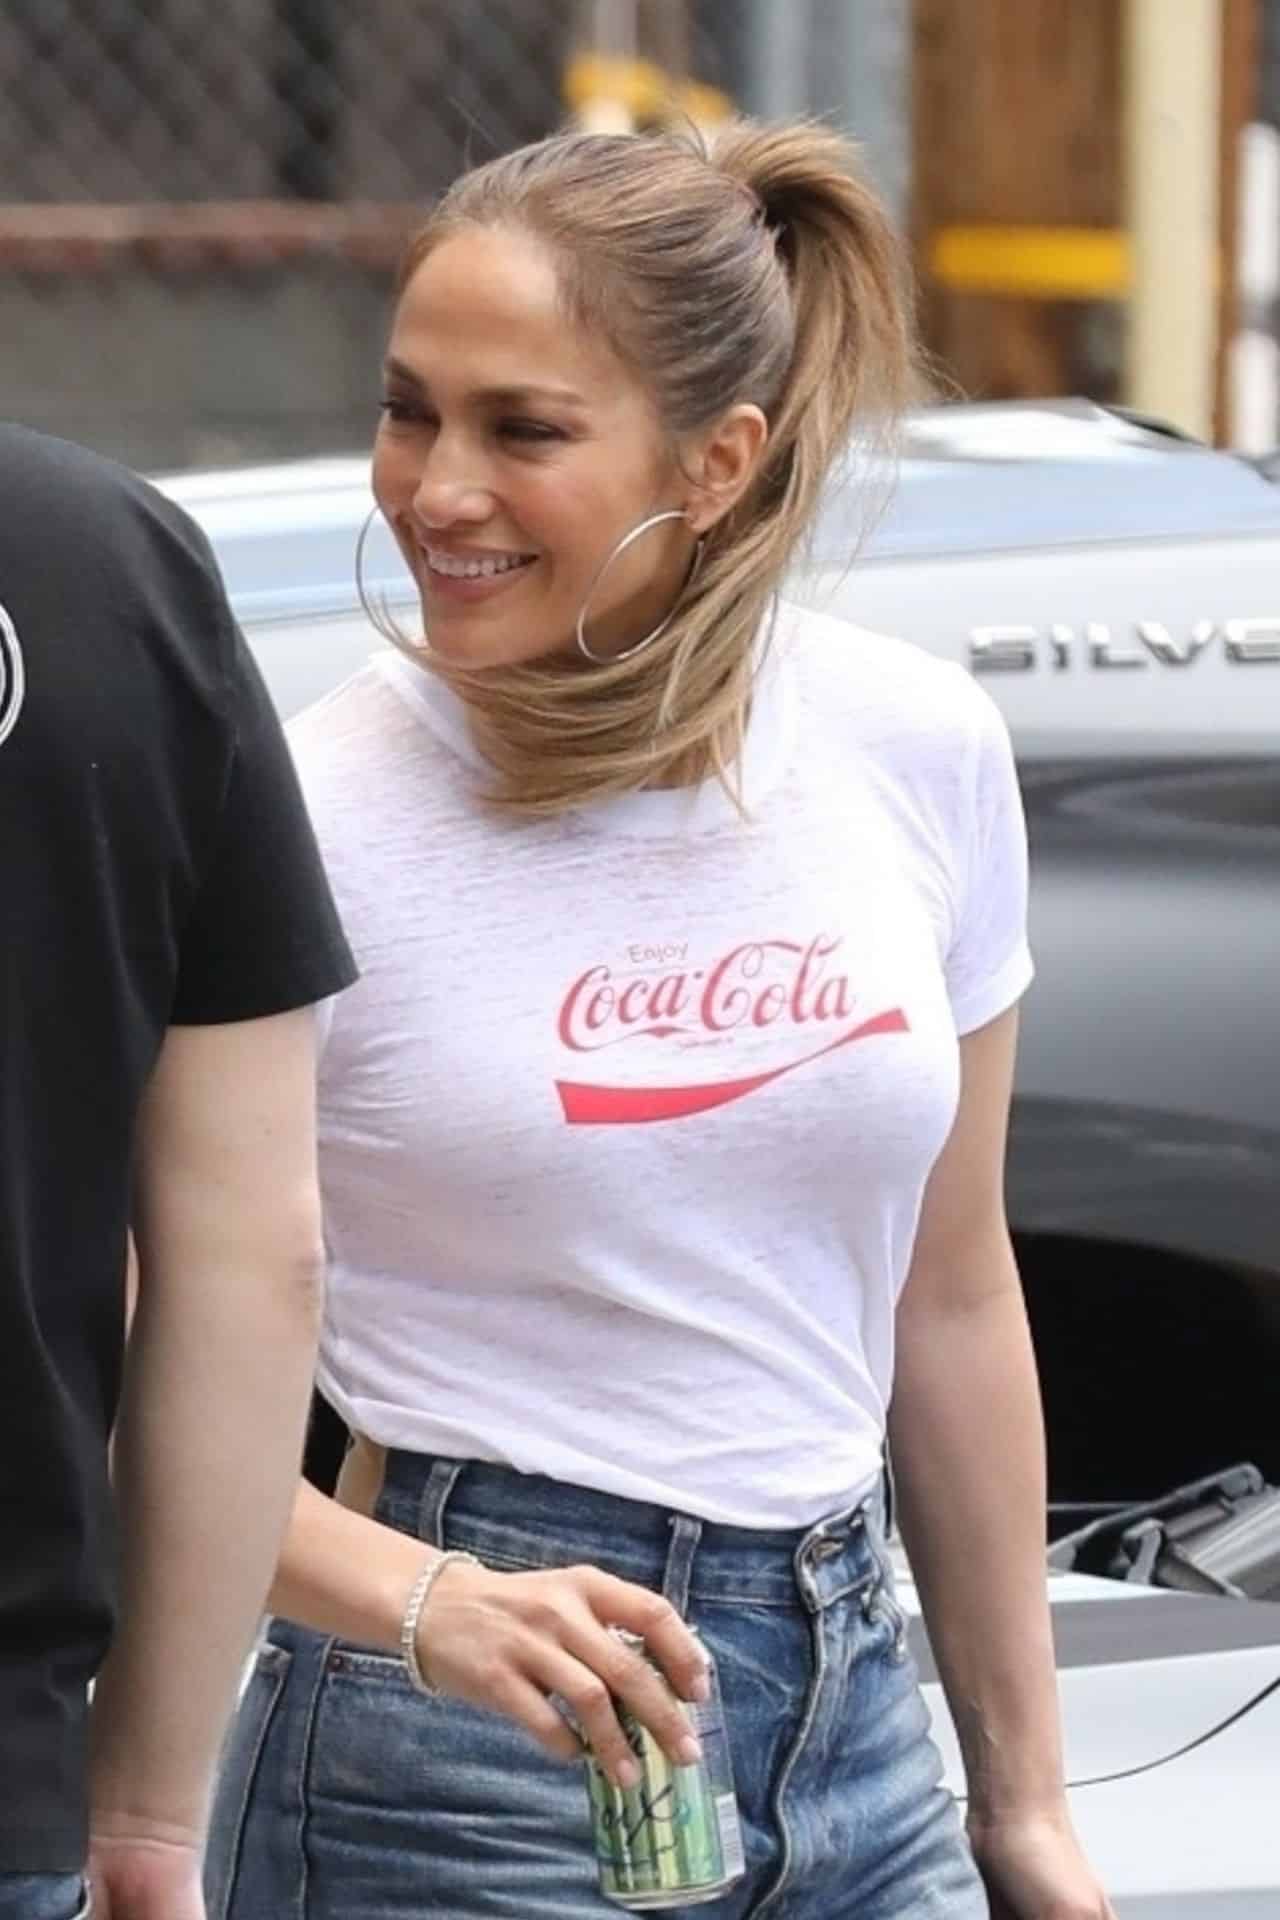 Jennifer Lopez Wears a Coca-Cola T-shirt as She Leaves the Studio with Ben